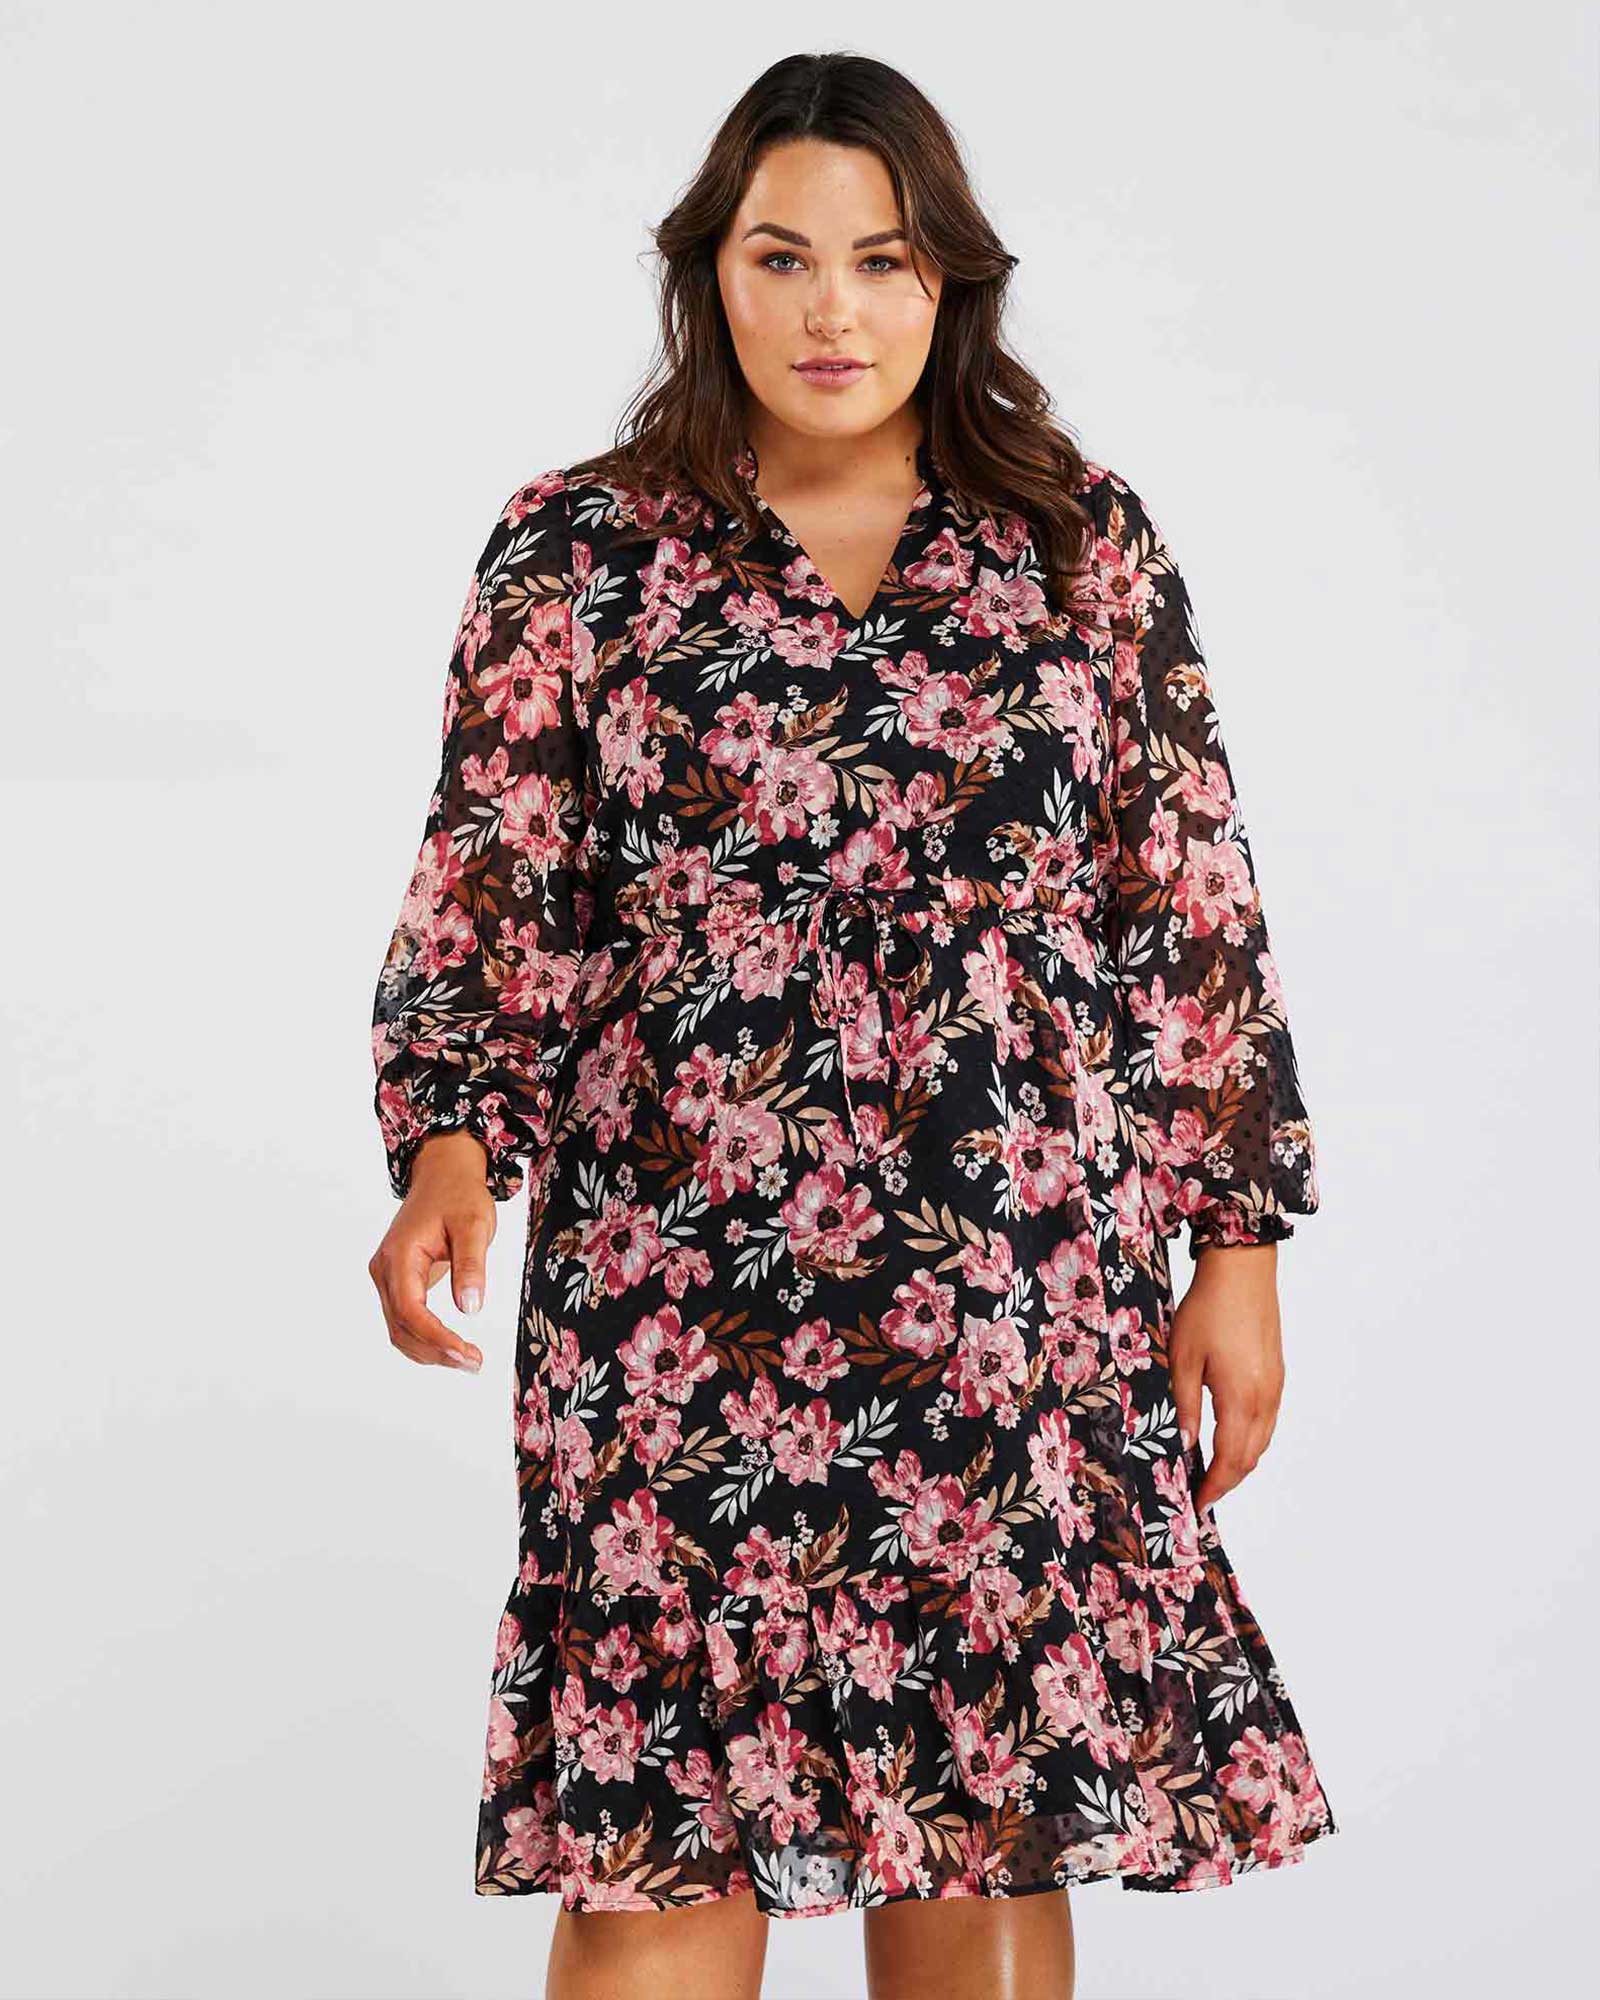 A plus size woman wearing a Woodland Floral Textured Mini Dress, perfect for her transeasonal wardrobe.